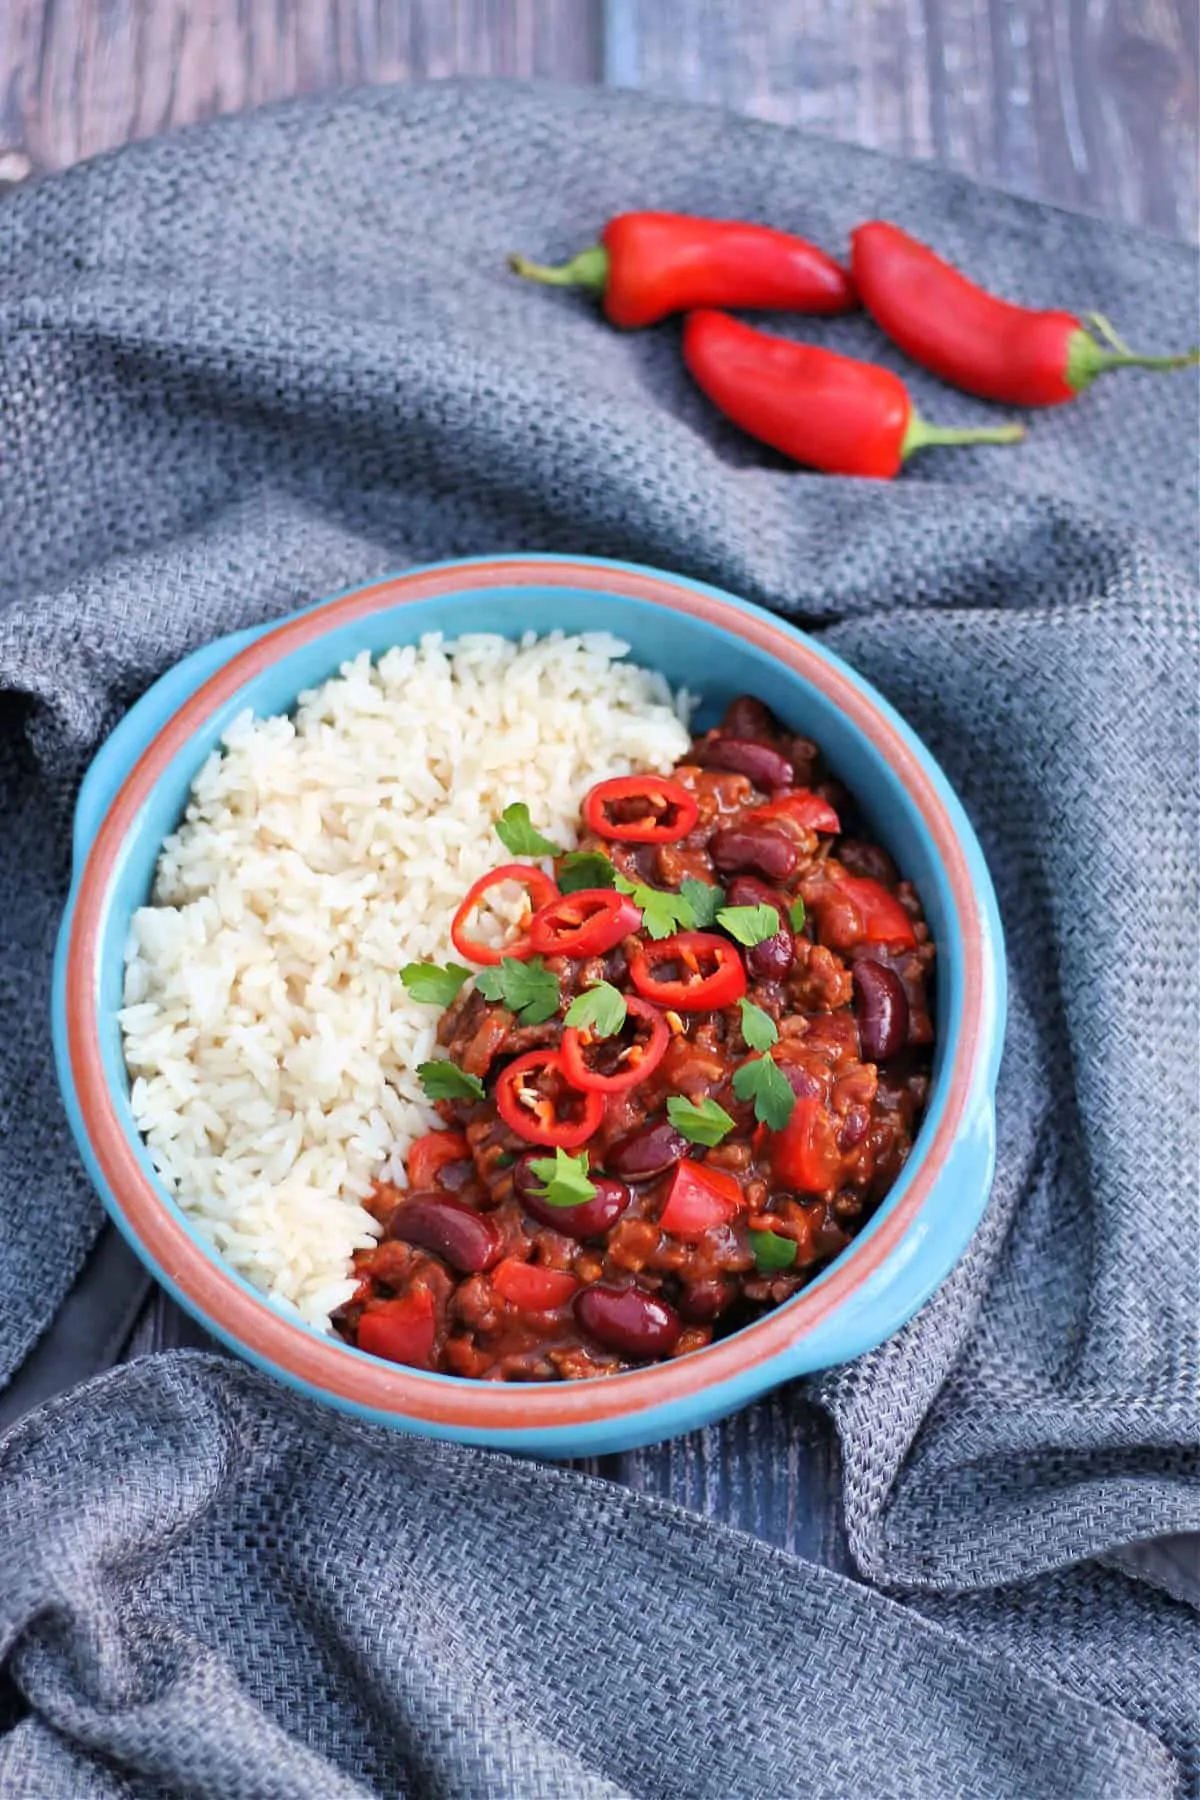 Bowl of chilli and rice with red chillis and herbs on top, on grey fabric background.